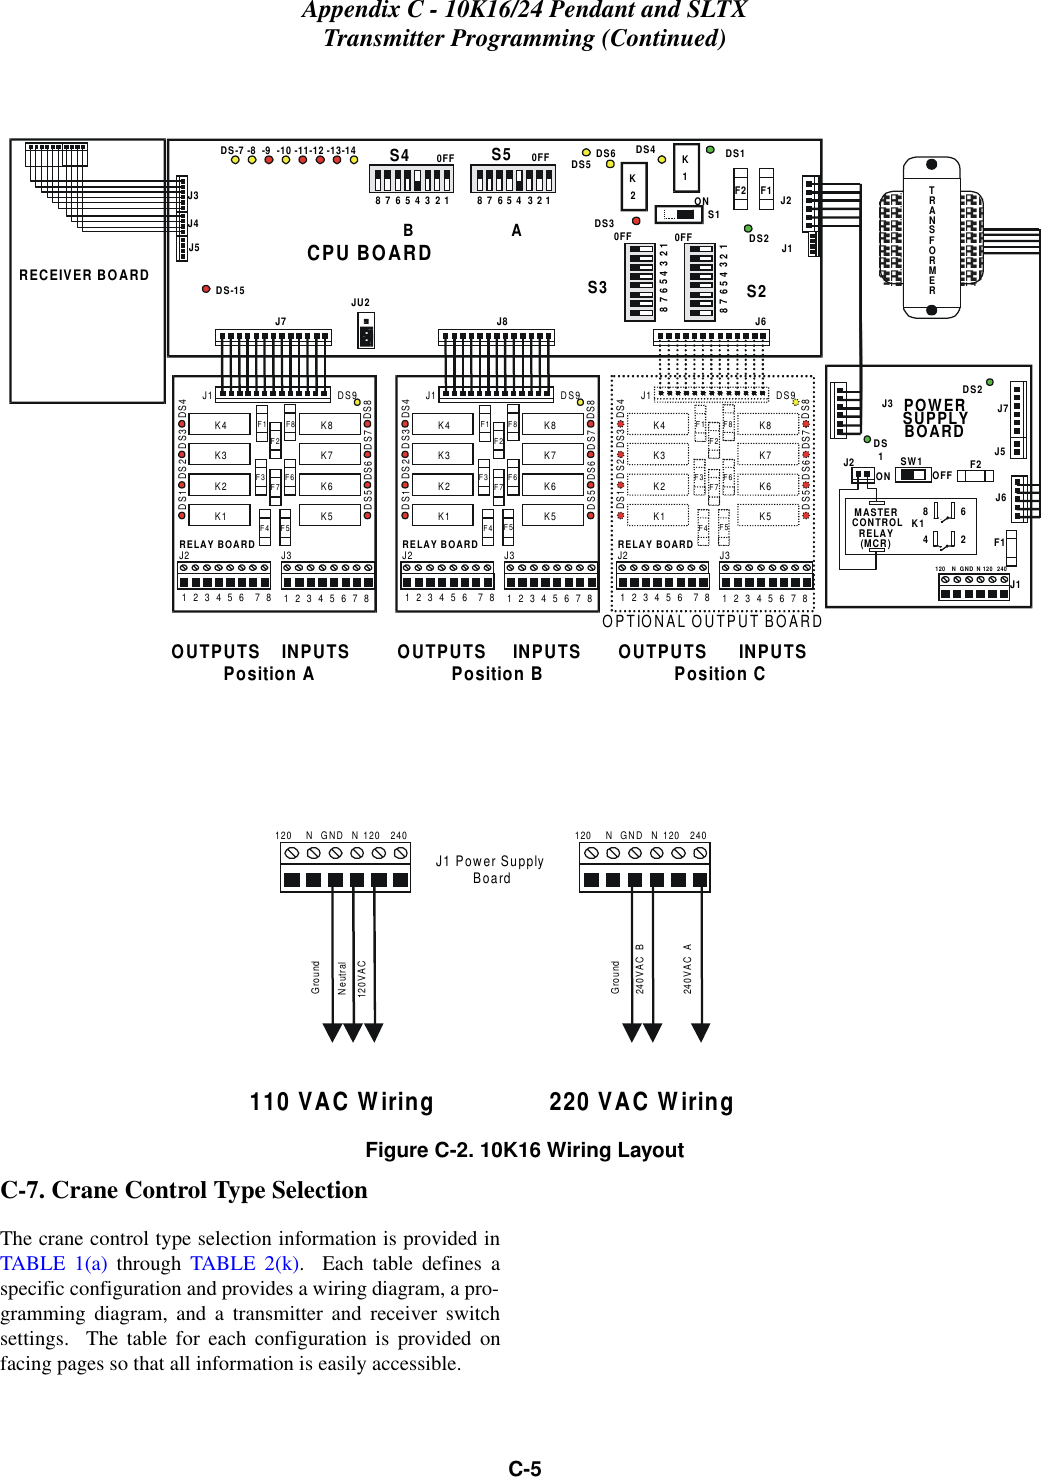 Appendix C - 10K16/24 Pendant and SLTXTransmitter Programming (Continued)C-5Figure C-2. 10K16 Wiring LayoutC-7. Crane Control Type SelectionThe crane control type selection information is provided inTABLE 1(a) through TABLE 2(k).  Each table defines aspecific configuration and provides a wiring diagram, a pro-gramming diagram, and a transmitter and receiver switchsettings.  The table for each configuration is provided onfacing pages so that all information is easily accessible.J1 Power Supply BoardNGNDN120 240120GroundNeutral120VACNGNDN120 240120Ground240VAC  B240VAC  A220 VAC Wiring110 VAC WiringJ21  2  3  4  5  6   7  8 1  2  3  4  5  6  7  8J3DS9DS1DS2DS3DS4K1K2K3K4K5K6K7K8F1F2F3F4 F5F6F7F8DS5 DS6 DS7 DS8J1RELAY BOARDJ21  2  3  4  5  6   7  8 1  2  3  4  5  6  7  8J3DS9DS1DS2DS3DS4K1K2K3K4K5K6K7K8F1F2F3F4 F5F6F7F8DS5 DS6 DS7 DS8J1RELAY BOARDJ5F2DS2DS1SW1ON OFFJ2J3 J7POWERSUPPLYBOARDRECEIVER BOARDTRANSFORMERJ3J4DS-15DS2K1S1DS5DS4 DS1DS3J7 J8 J68765432187654 3210FF 0FFS3 S20FF87654 321S587654321S40FFDS-7 -8  -9  -10 -11-12 -13-14J5JU2J2J1K2DS6ONCPU BOARDF1J6J1NGNDN120 2401202864MASTERCONTROLRELAY(MCR)K1OUTPUTS    INPUTS         OUTPUTS     INPUTS       OUTPUTS      INPUTS          Position A                          Position B                         Position CBAF2 F1OPTIONAL OUTPUT BOARDJ21  2  3  4  5  6   7  8 1  2  3  4  5  6  7  8J3DS9DS1 DS2 DS3 DS4K1K2K3K4K5K6K7K8F1F2F3F4 F5F6F7F8DS5 DS6 DS7 DS8J1RELAY BOARD